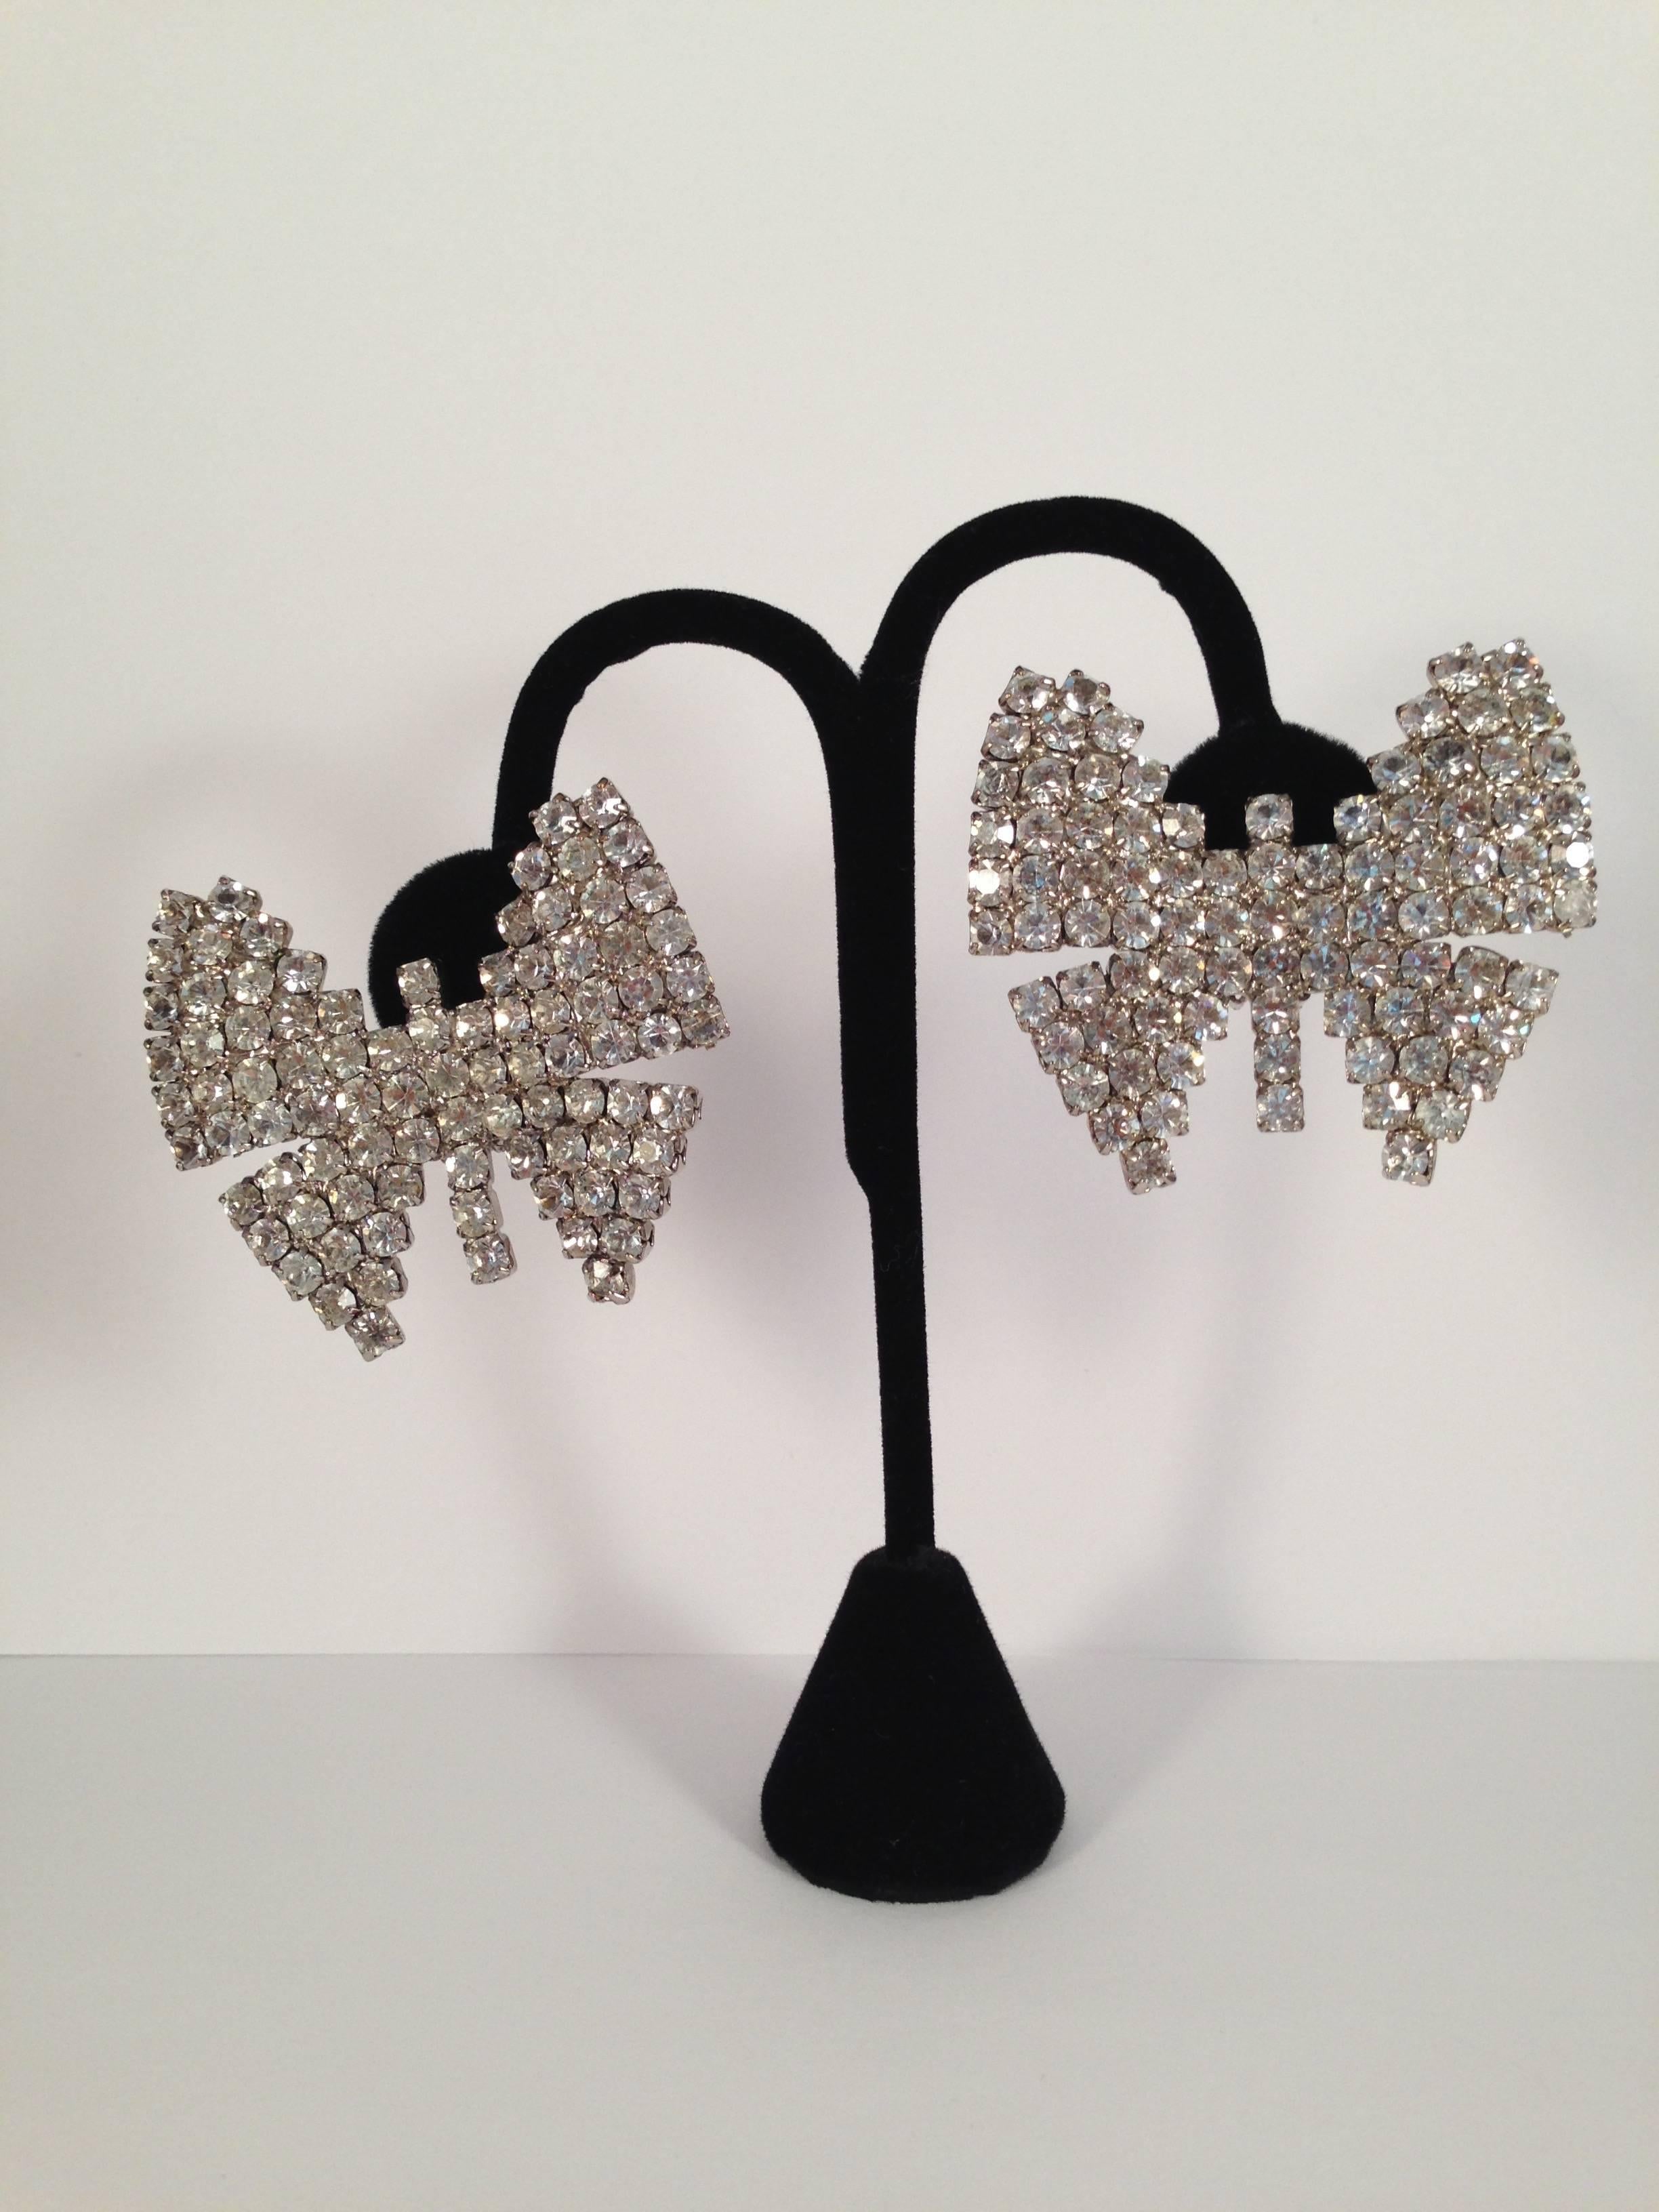 These large rhinestone butterfly clip-on earrings were made by Weiss in the 1960s. They are huge and measure 2 1/4" wide by 1 7/8" high. They are marked 'Weiss' on the back of the clips (see photo #5). They are in excellent condition.